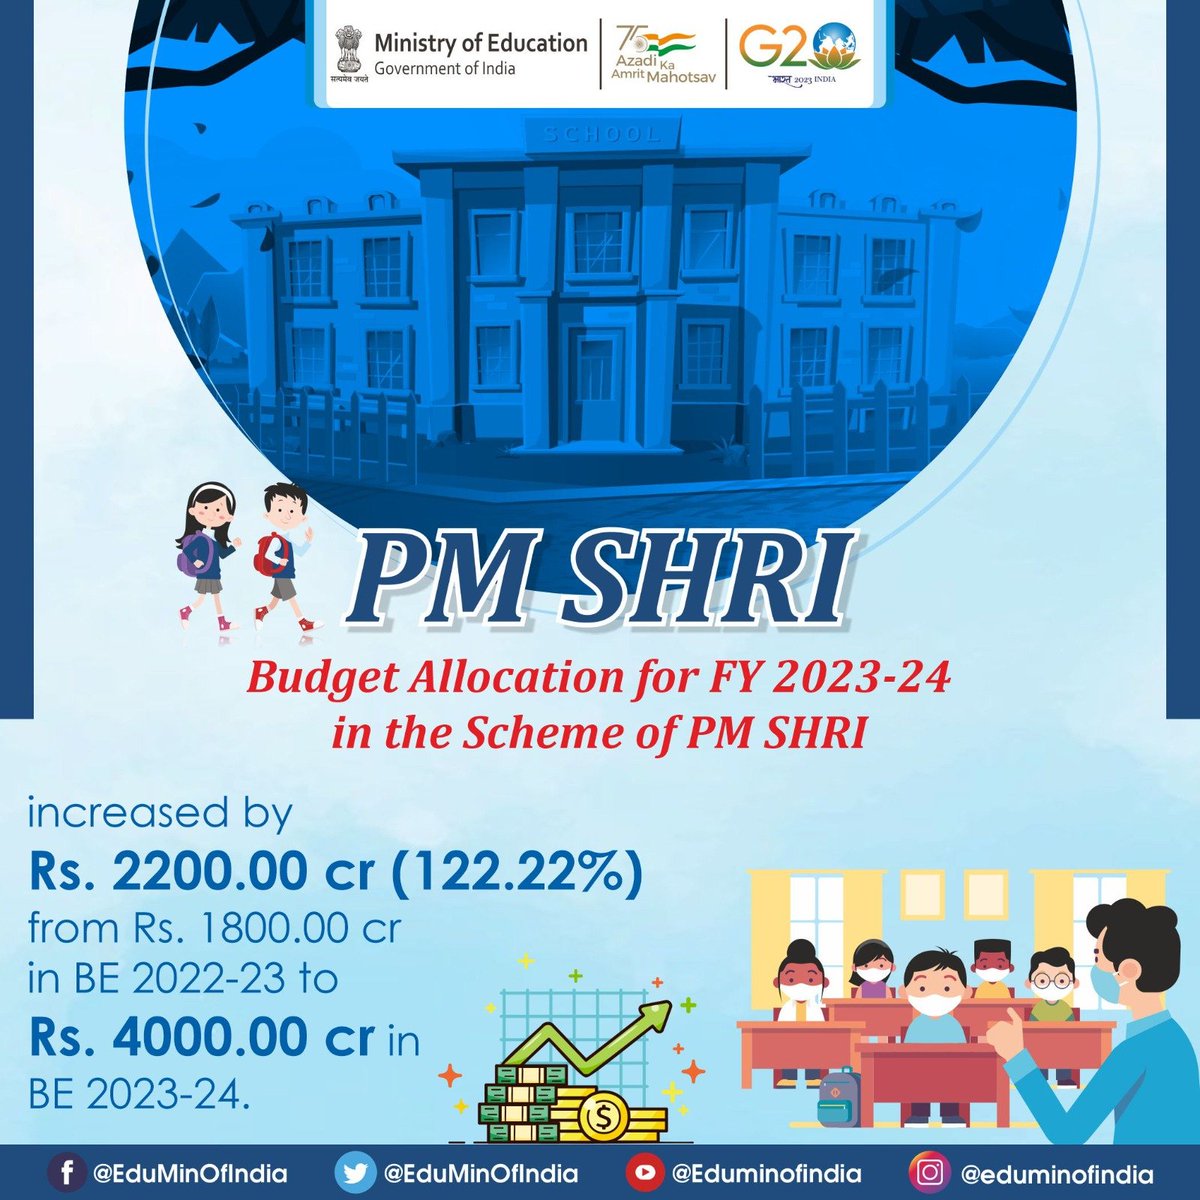 #Budget2023: Budget allocation for #PMPOSHAN scheme has increased by Rs. 1366.25 cr (13.35%) in FY 2023-24 as compared to 2022-23. 

For #PMSHRI scheme, it has increased by Rs. 2200.00 cr (122.22%) from Rs. 1800.00 cr in 2022-23 to Rs. 4000.00 cr in 2023-24.